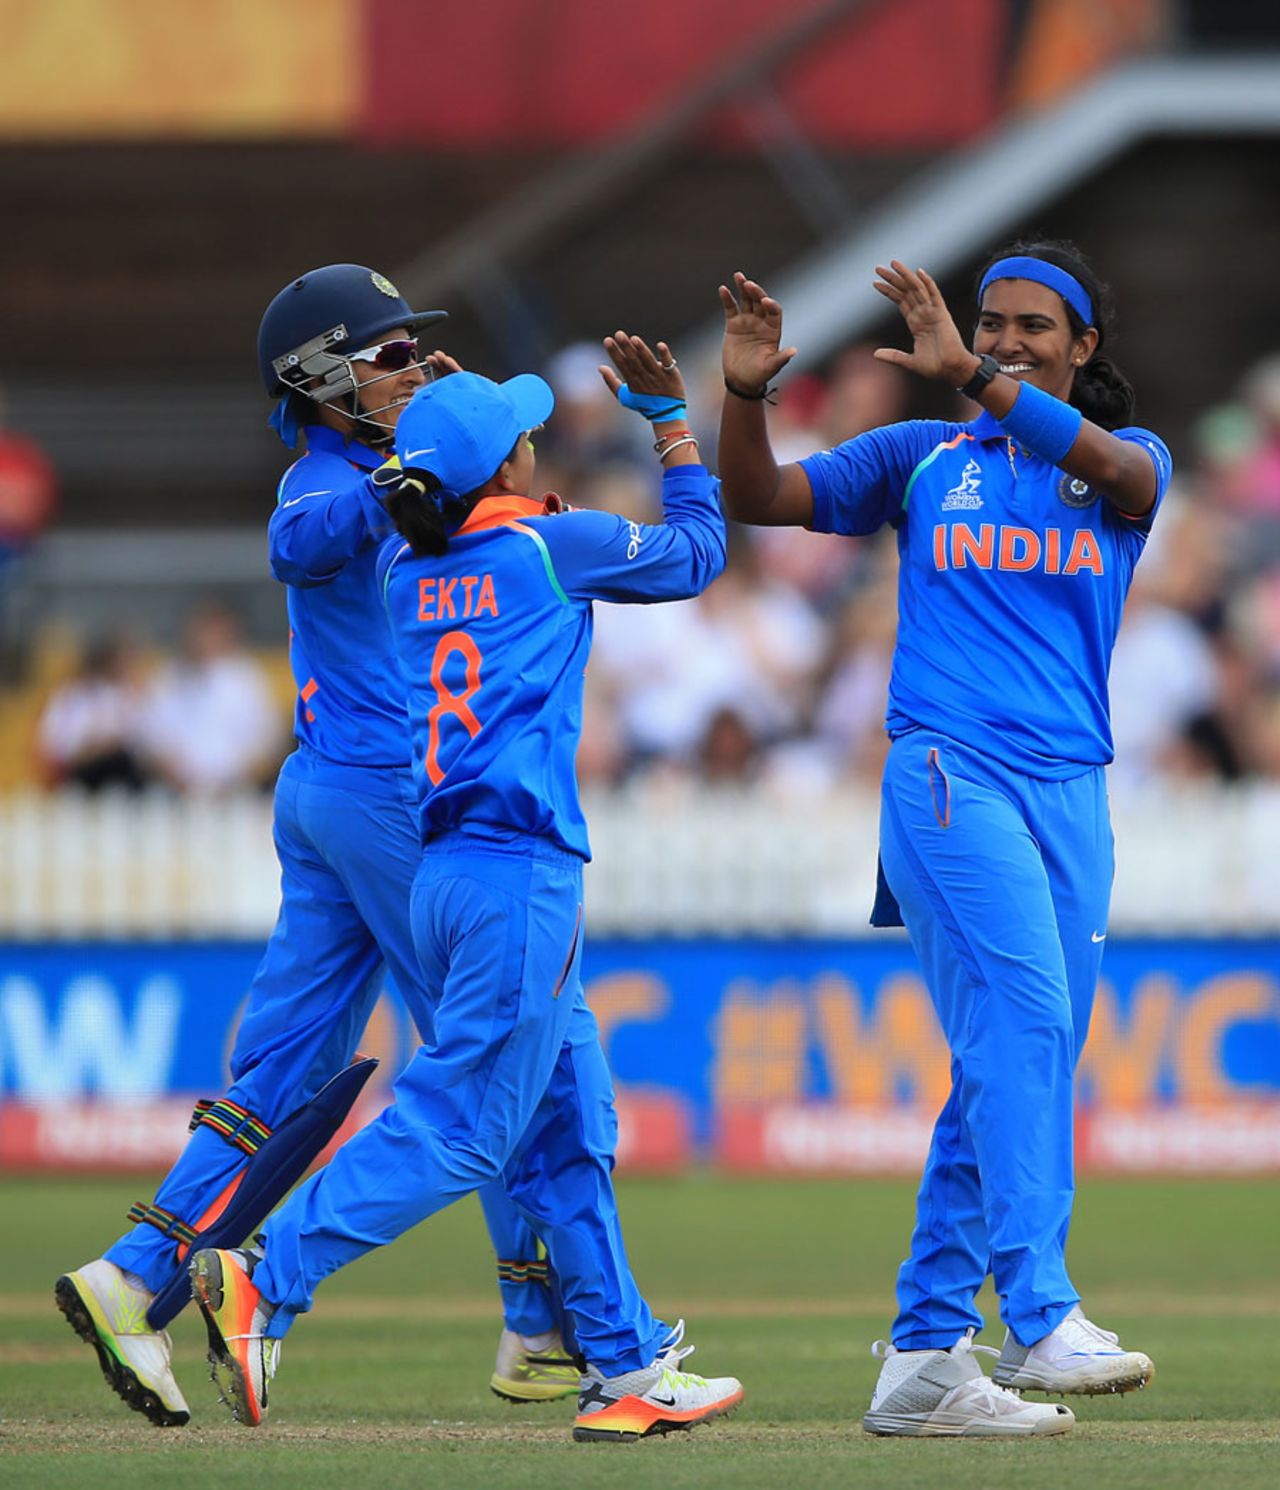 Shikha Pandey struck twice in her opening spell, England v India, Women's World Cup, Derby, June 24, 2017